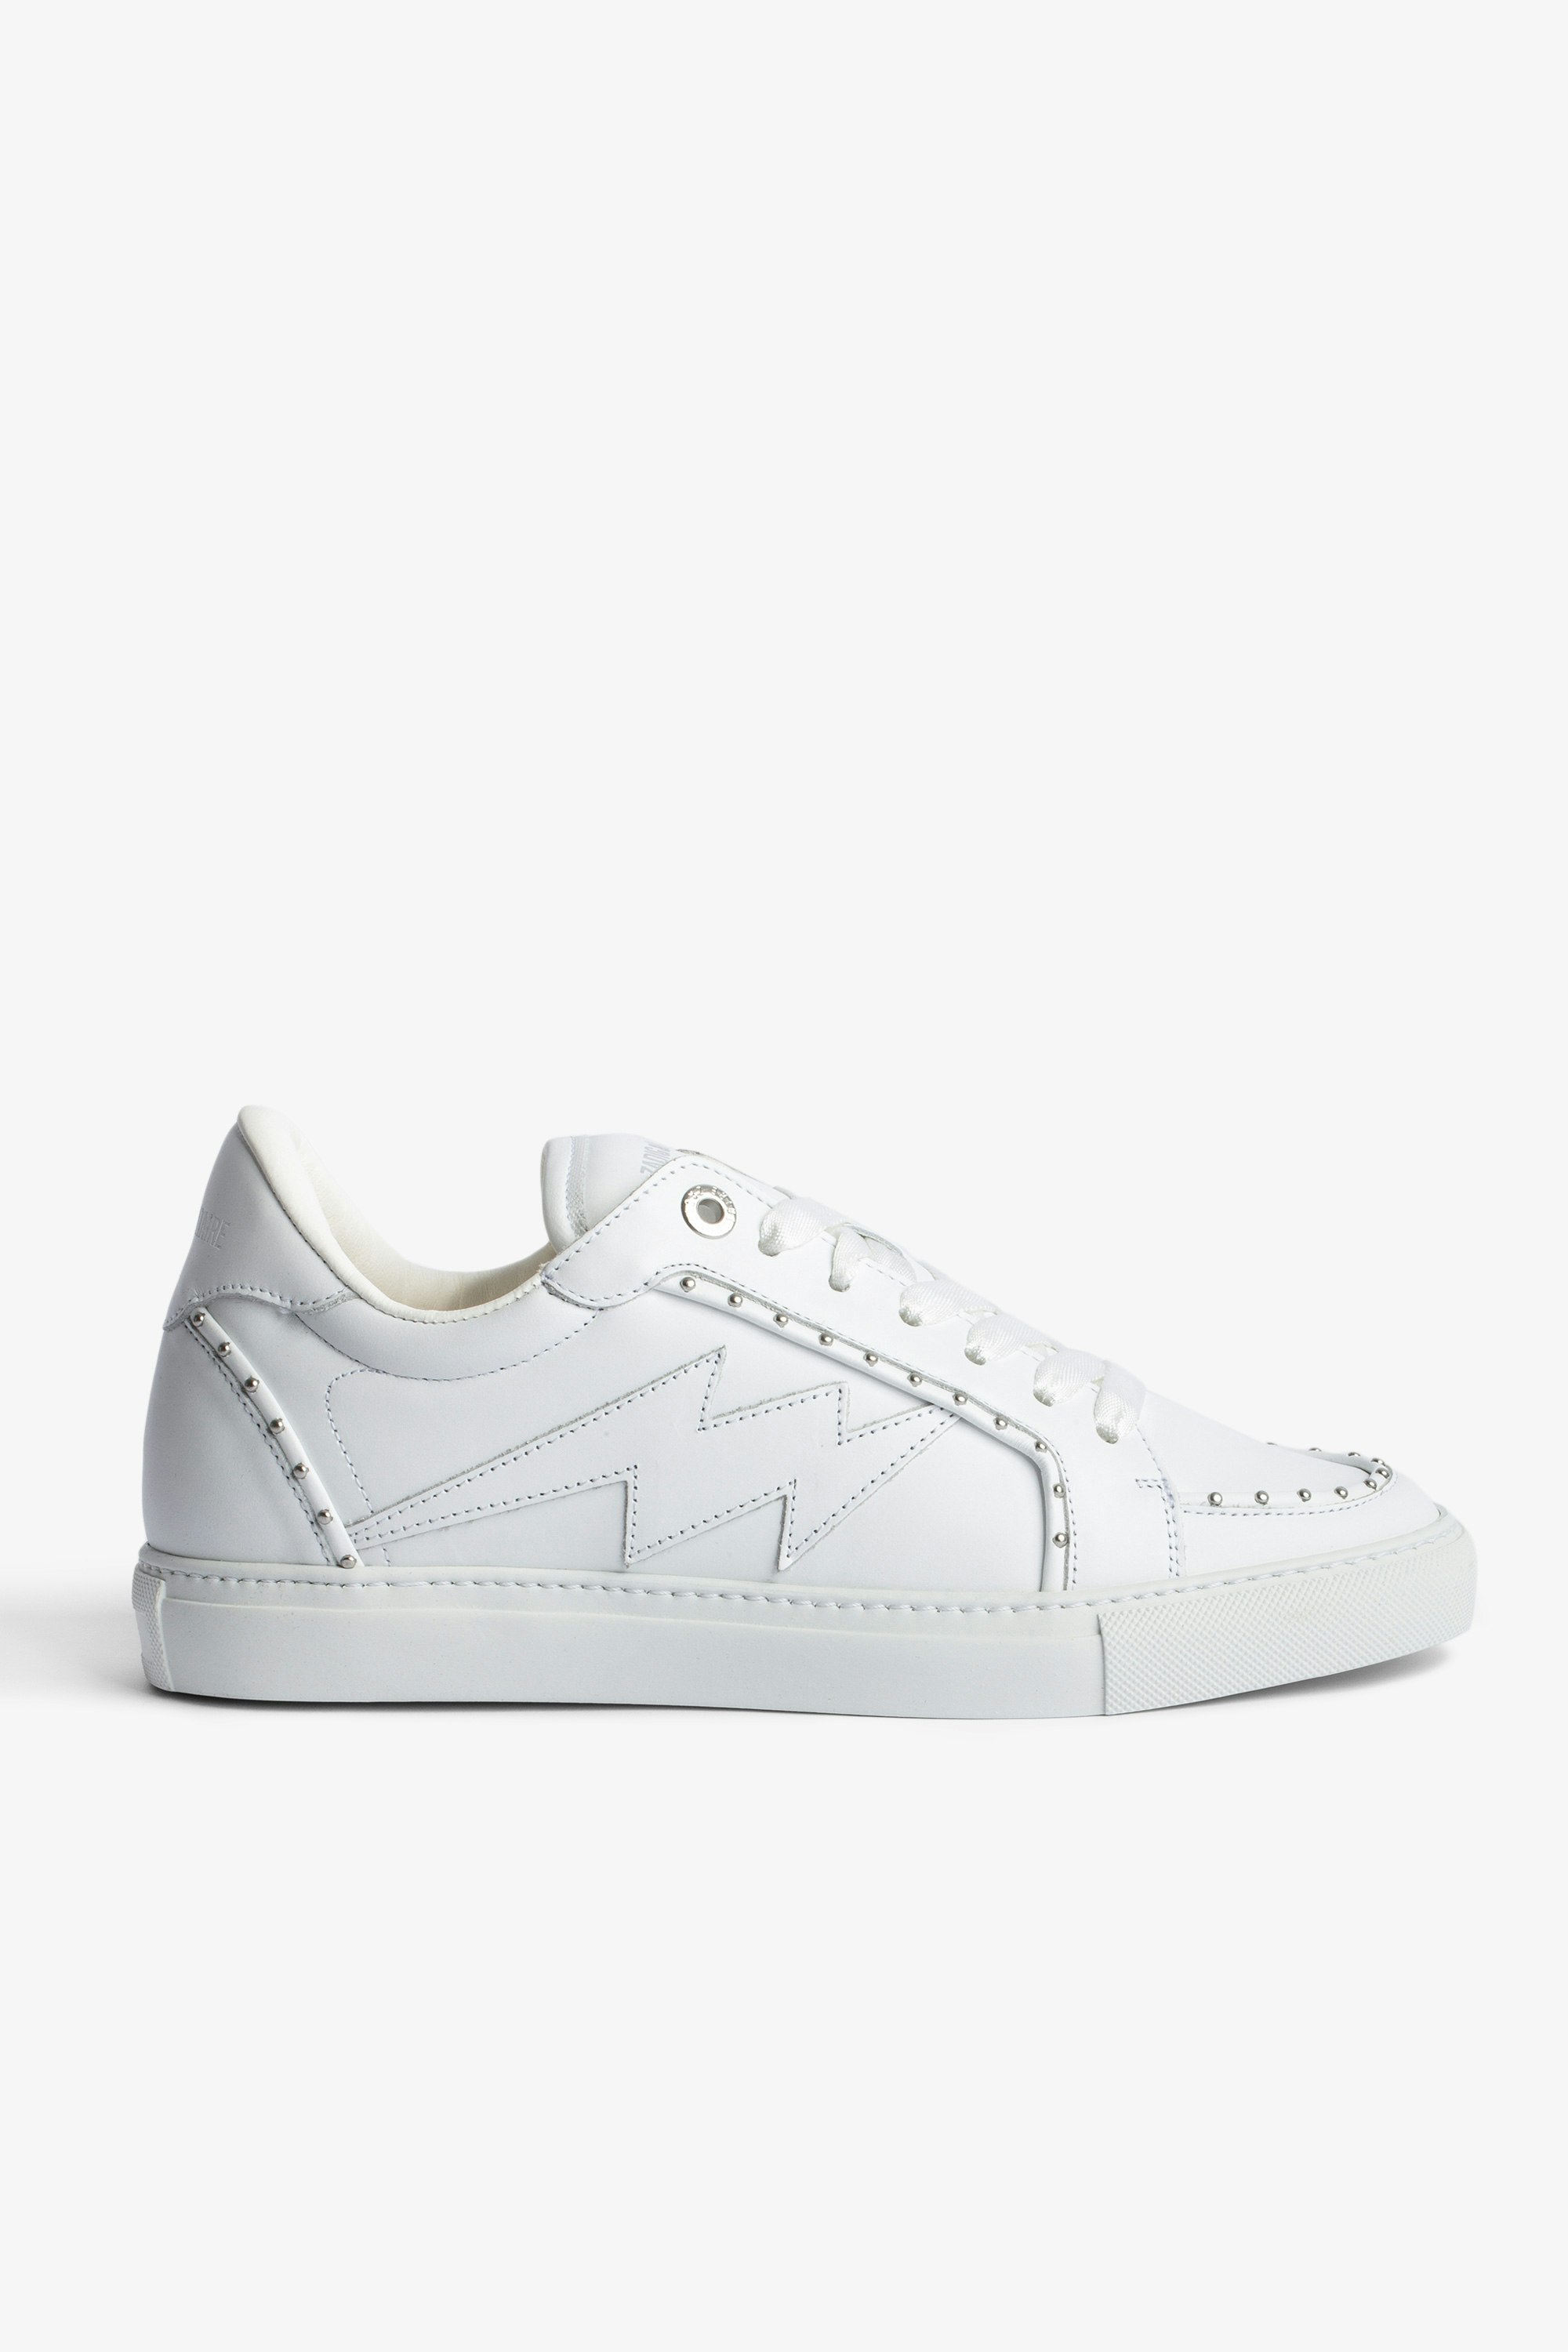 ZV1747 Studded スニーカー Women's low-top sneakers in smooth white leather with silver-tone studs